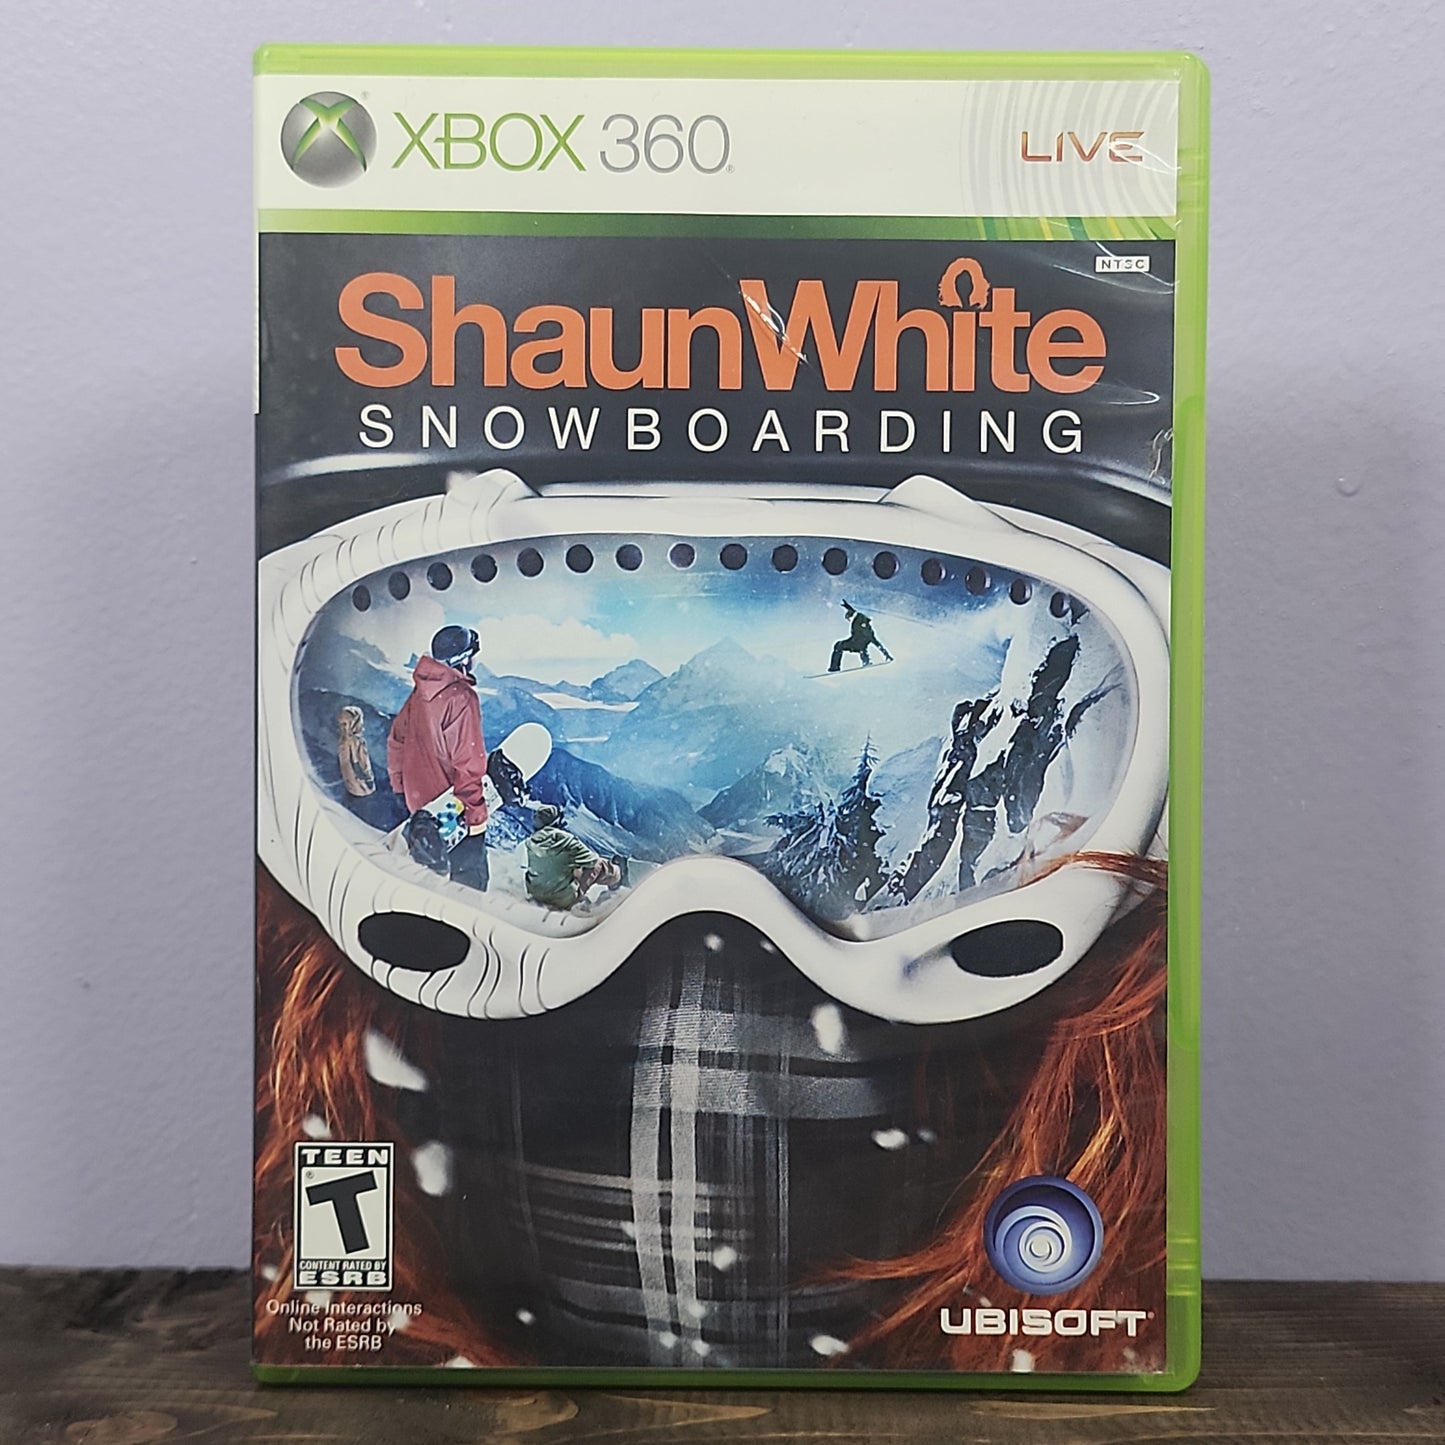 Xbox 360 - Shaun White Snowboarding Retrograde Collectibles CIB, Open World, Shaun White, Ski, Snowboarding, Sports, T Rated, Ubisoft, Ubisoft Montreal, Xbox 36 Preowned Video Game 